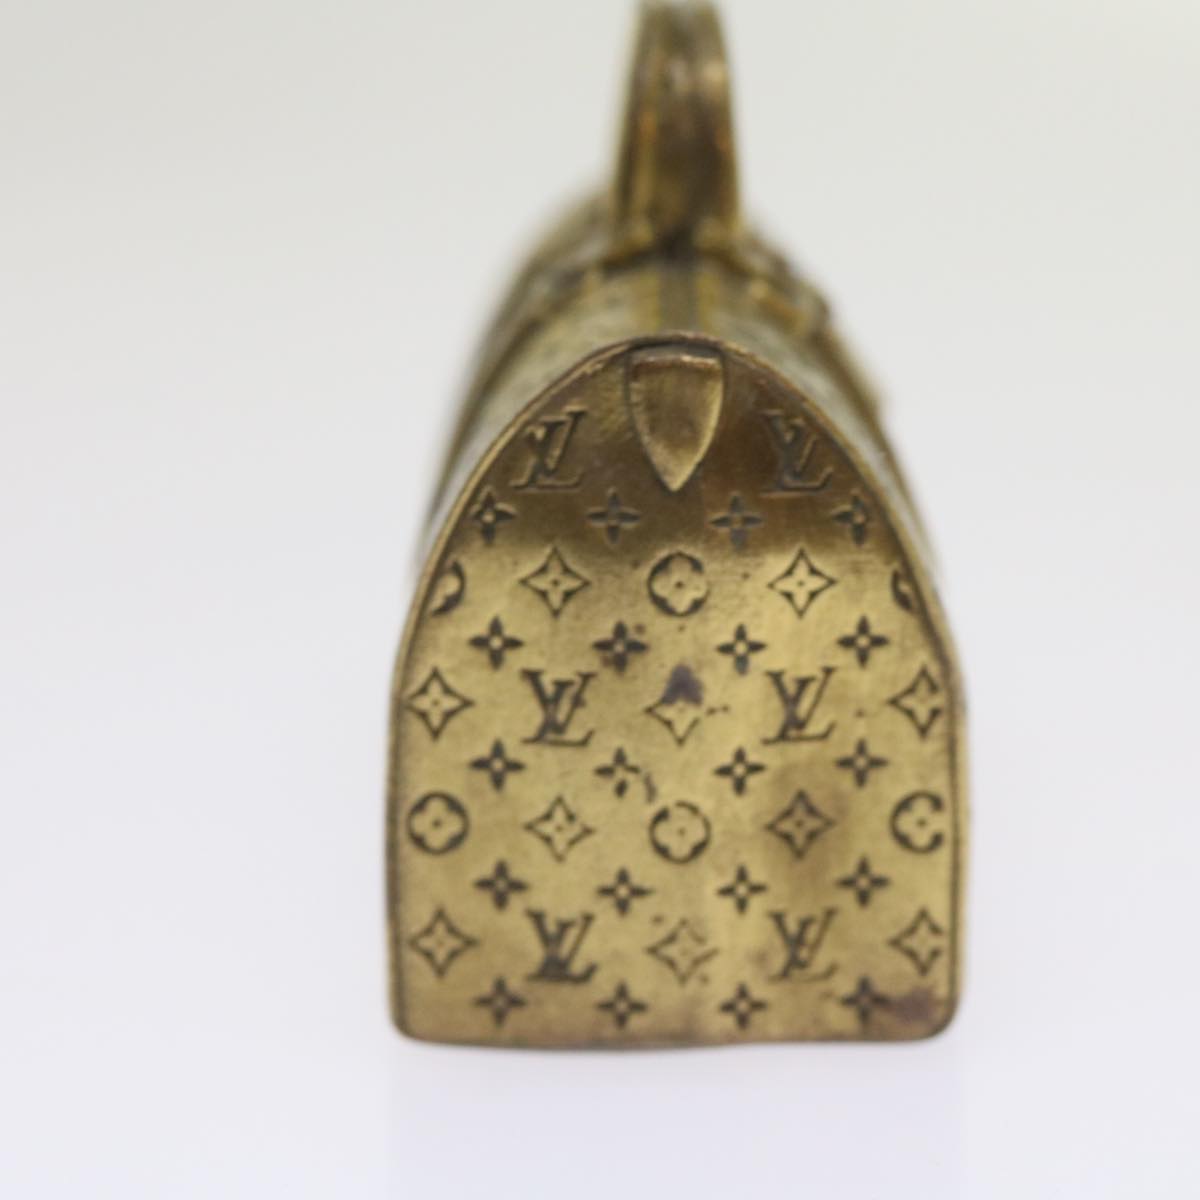 LOUIS VUITTON Paper weight Gold Tone LV Auth 67242